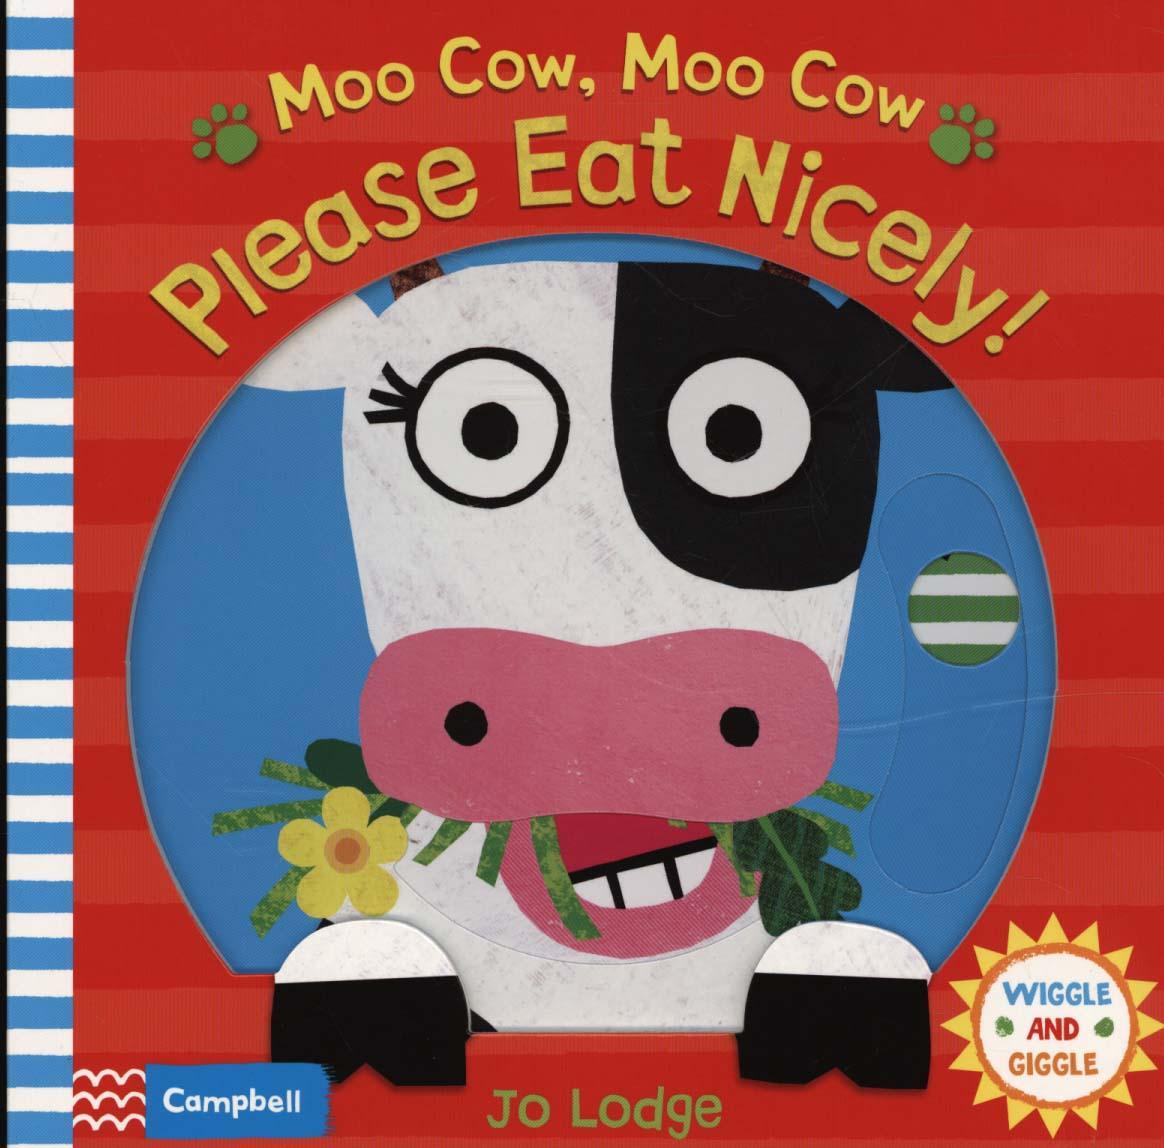 Moo Cow, Moo Cow, Please Eat Nicely!